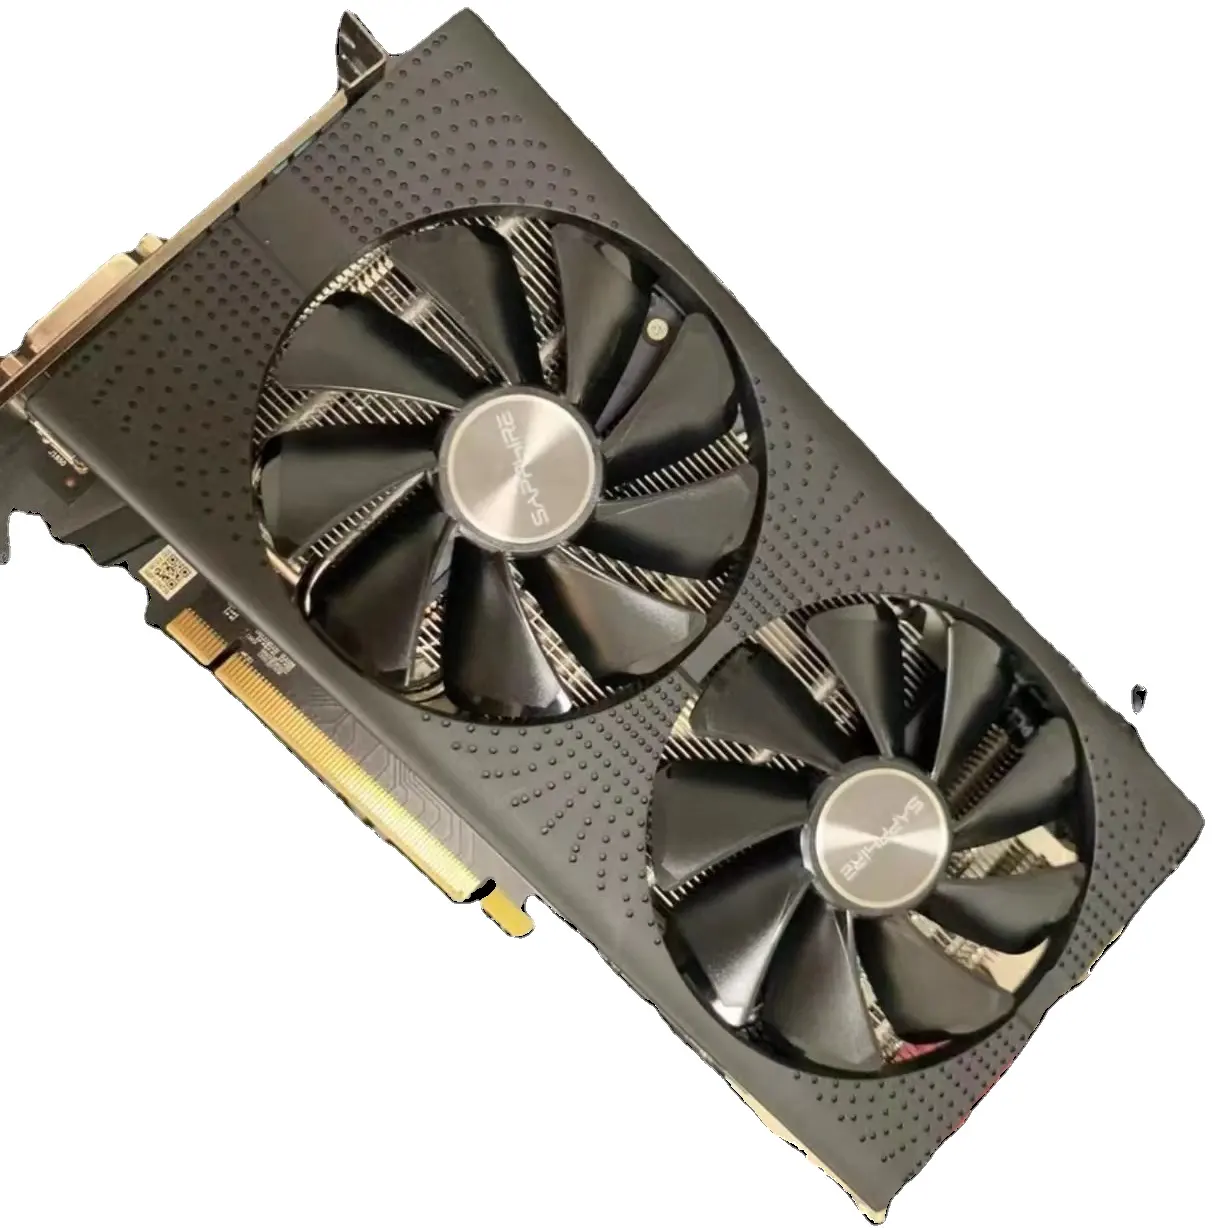 Hot sell Graphics Cards RX580 8GB Rx 580 8 gb Video Card Desktop PC Computer Gaming Amd Rx 580 Video Card Best Price GPU